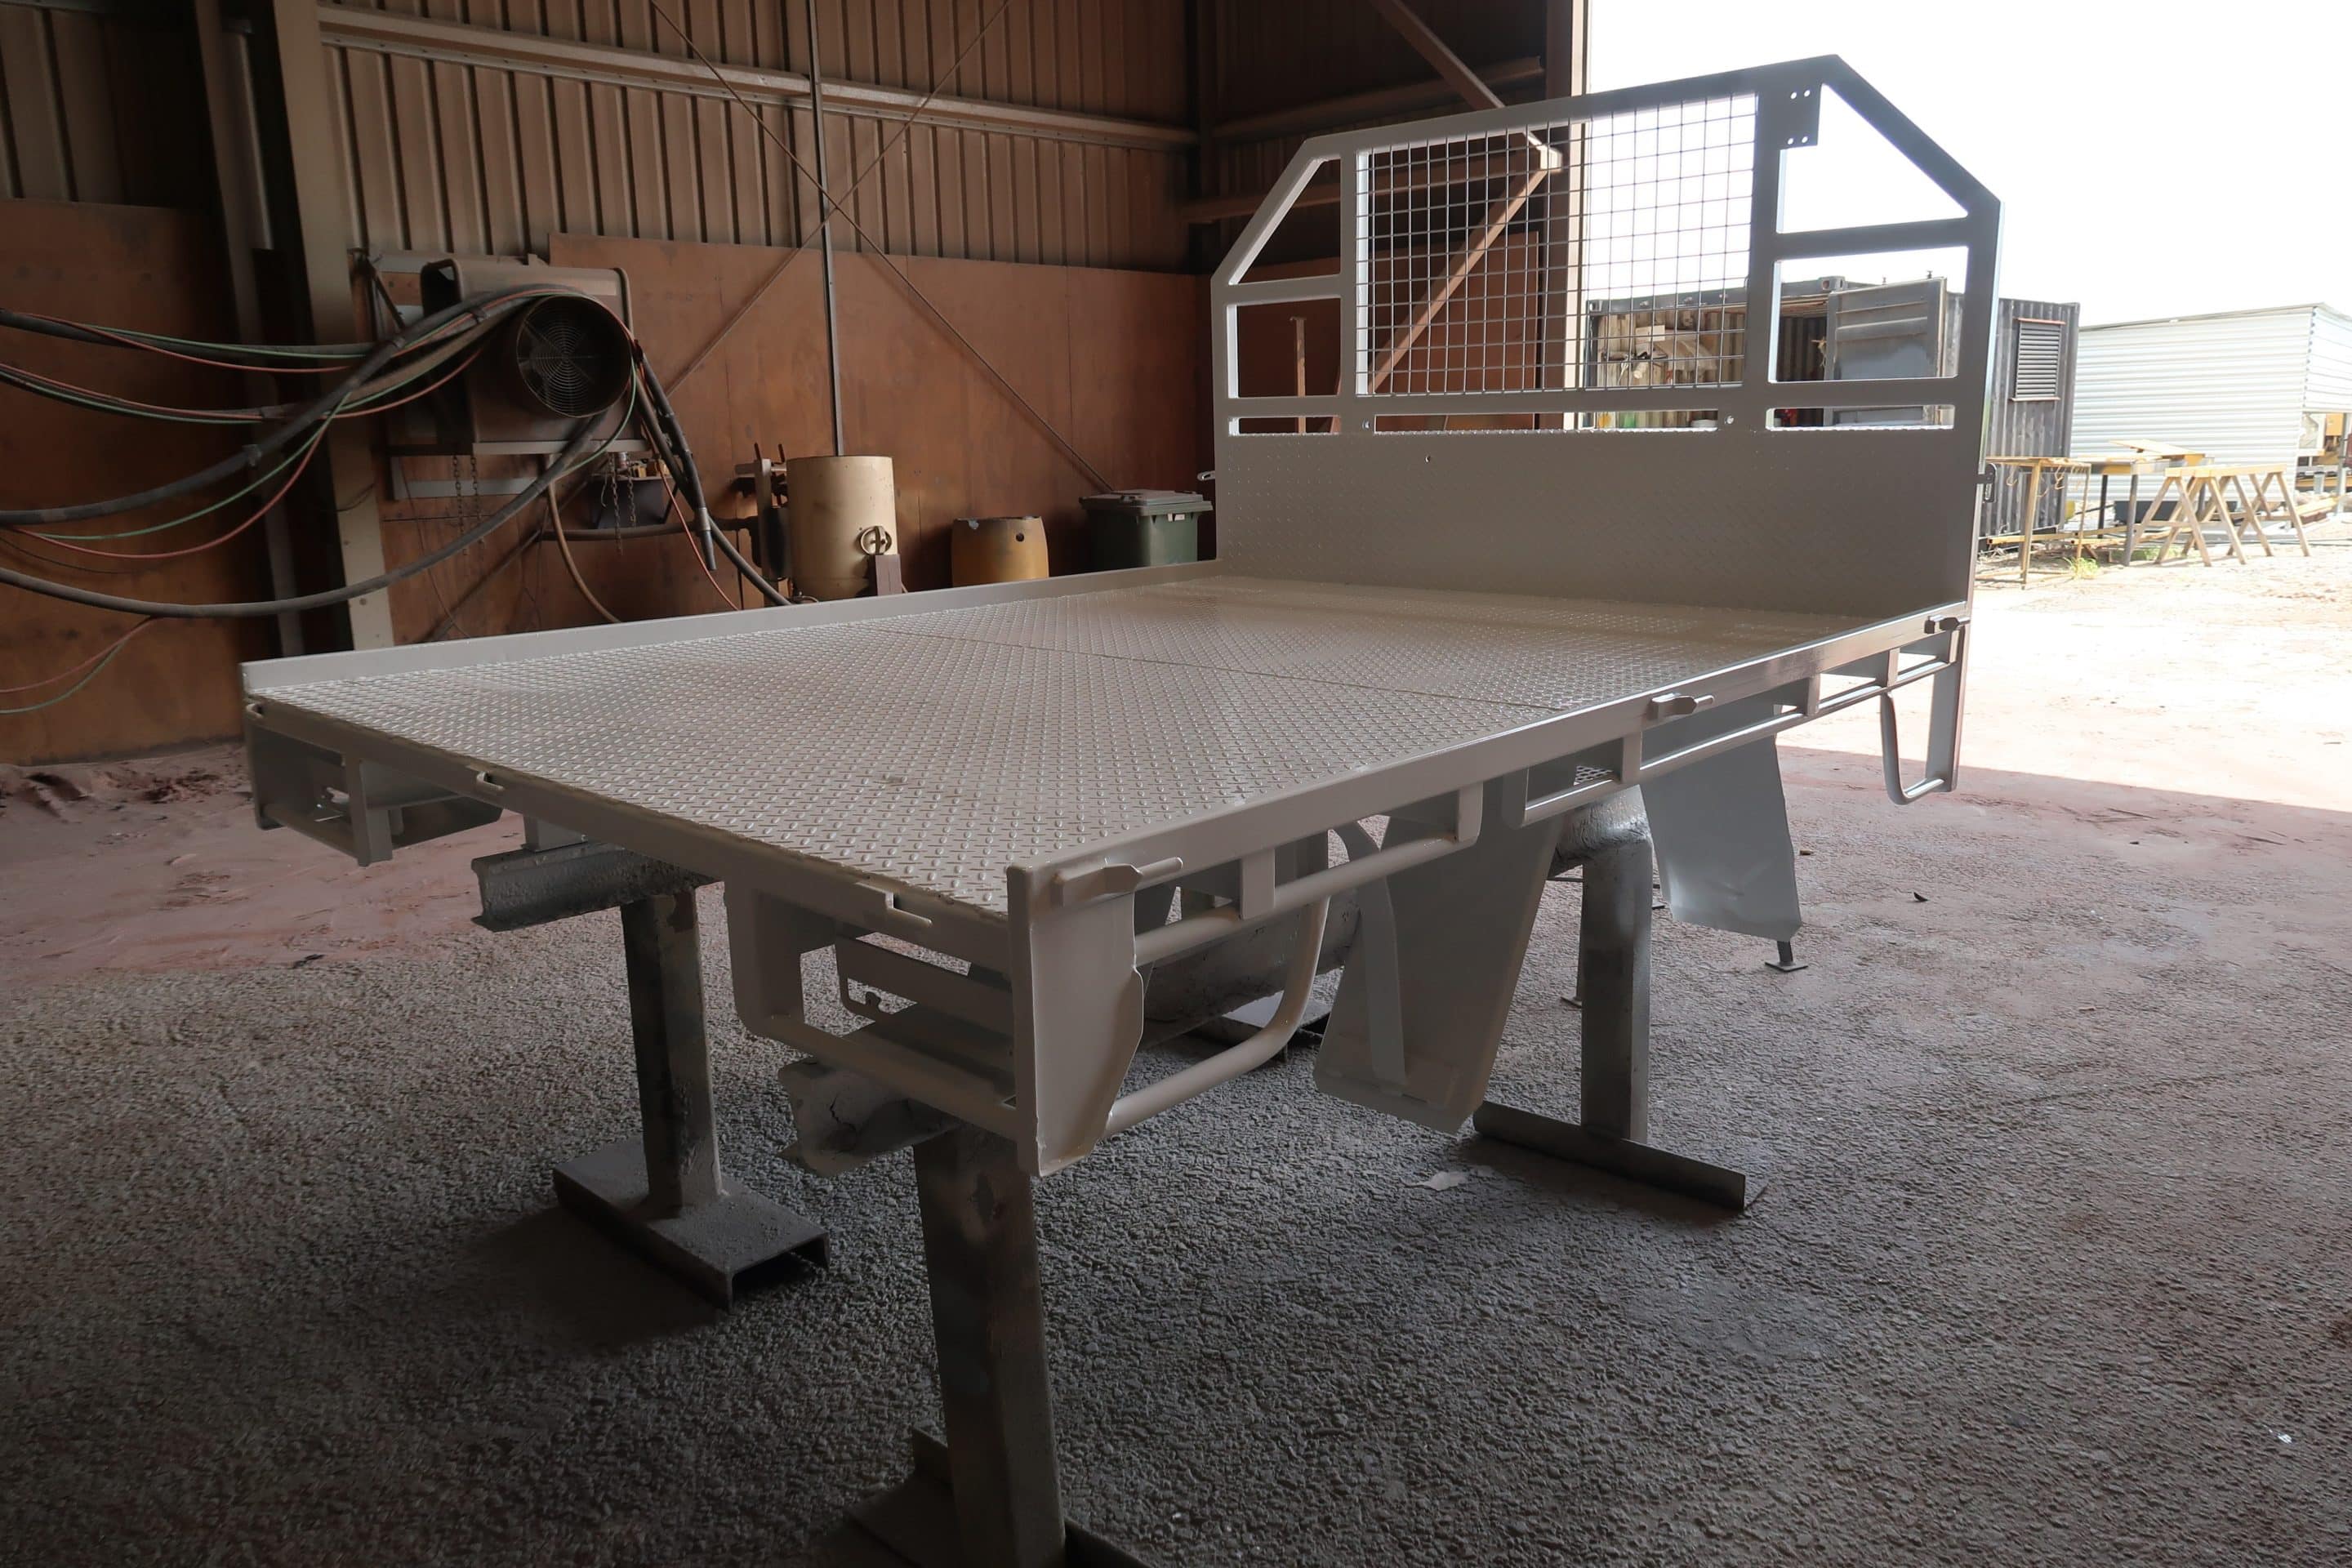 Tray scaled table — MDD Heavy Industries in Eton, QLD